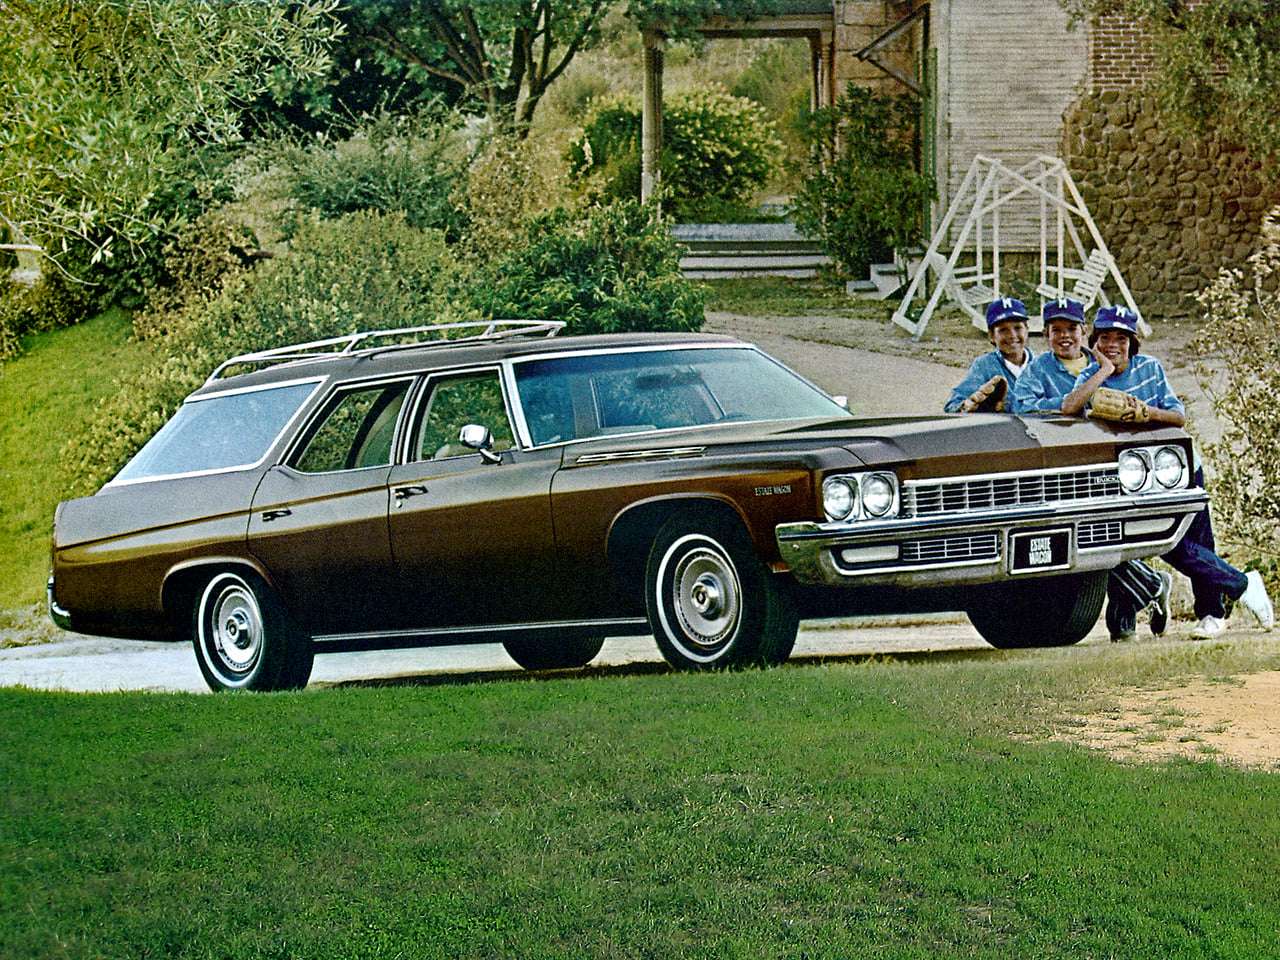 1972 Buick station wagon puzzle online